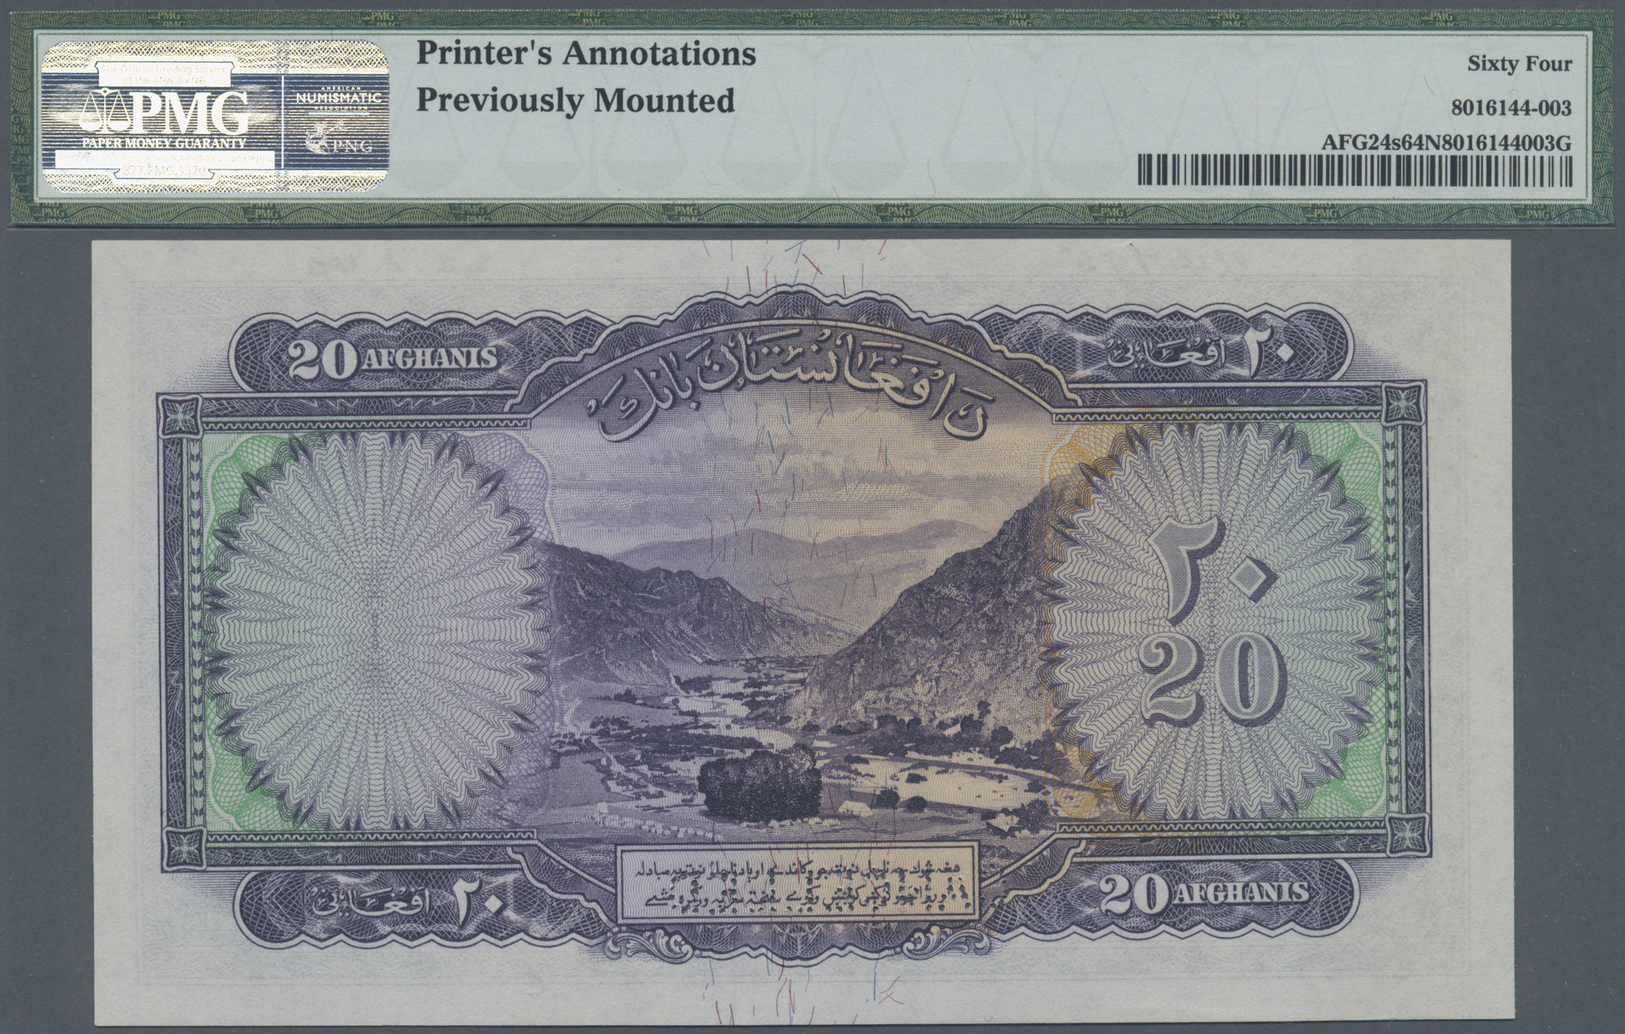 00002 Afghanistan: 20 Afghanis ND(1939) Specimen P. 24s, Key Note Of This Series, PMG Graded 64 Choice UNC Net. - Afghanistan